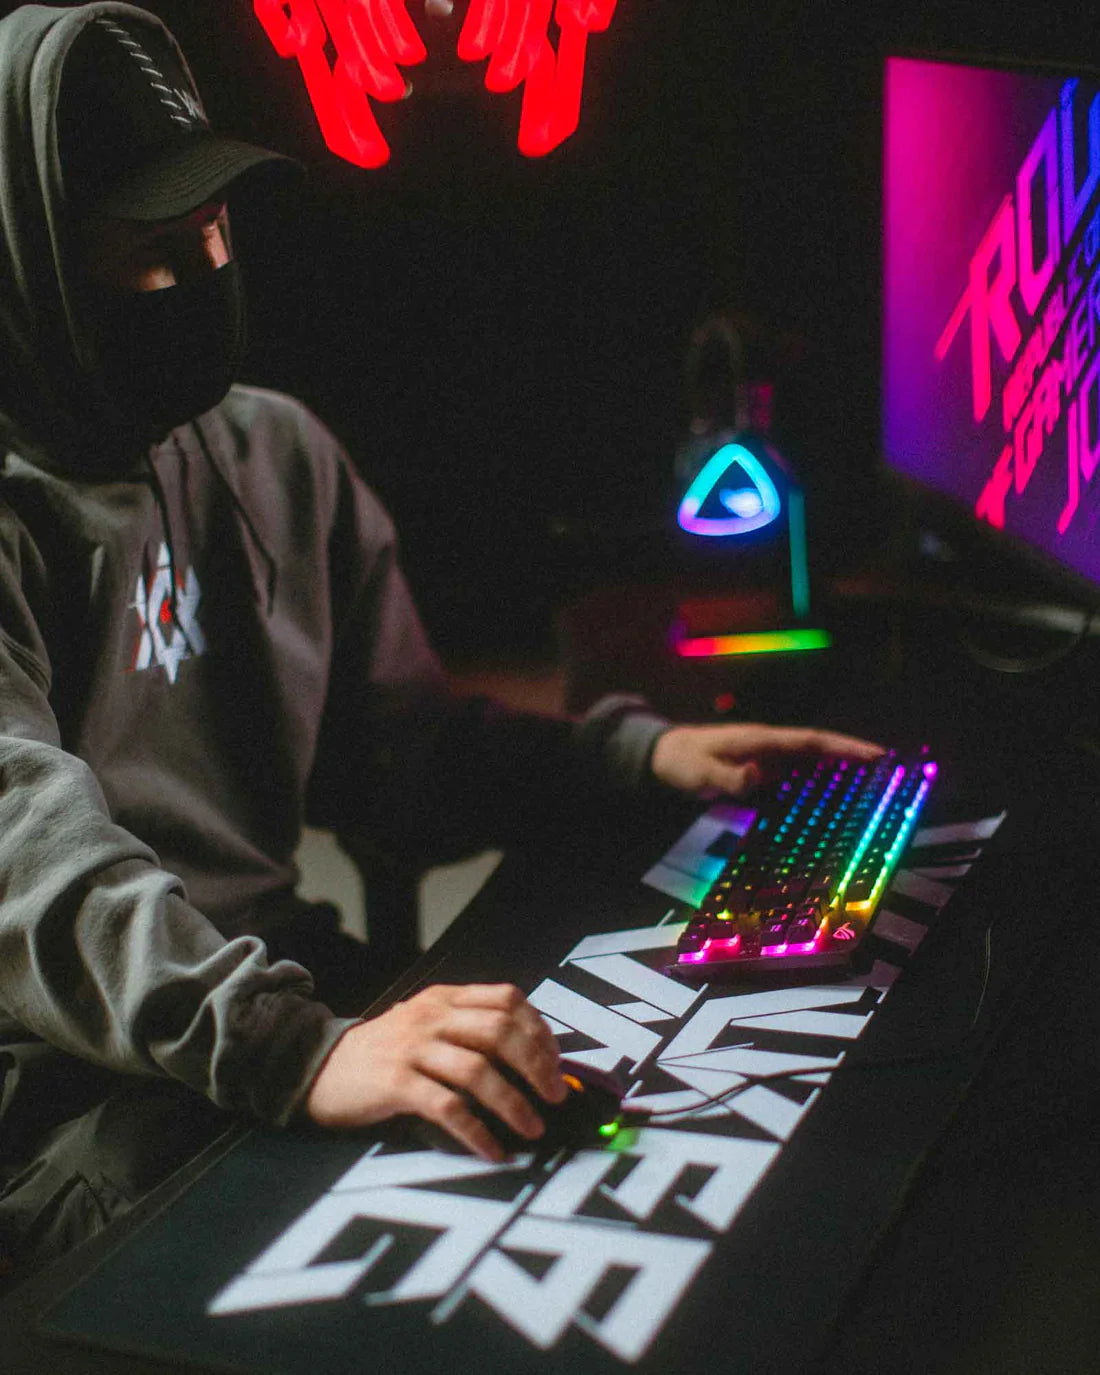 Gamer engaging in an immersive gaming experience with the Alan Walker design mousepad, complete with mood lighting.